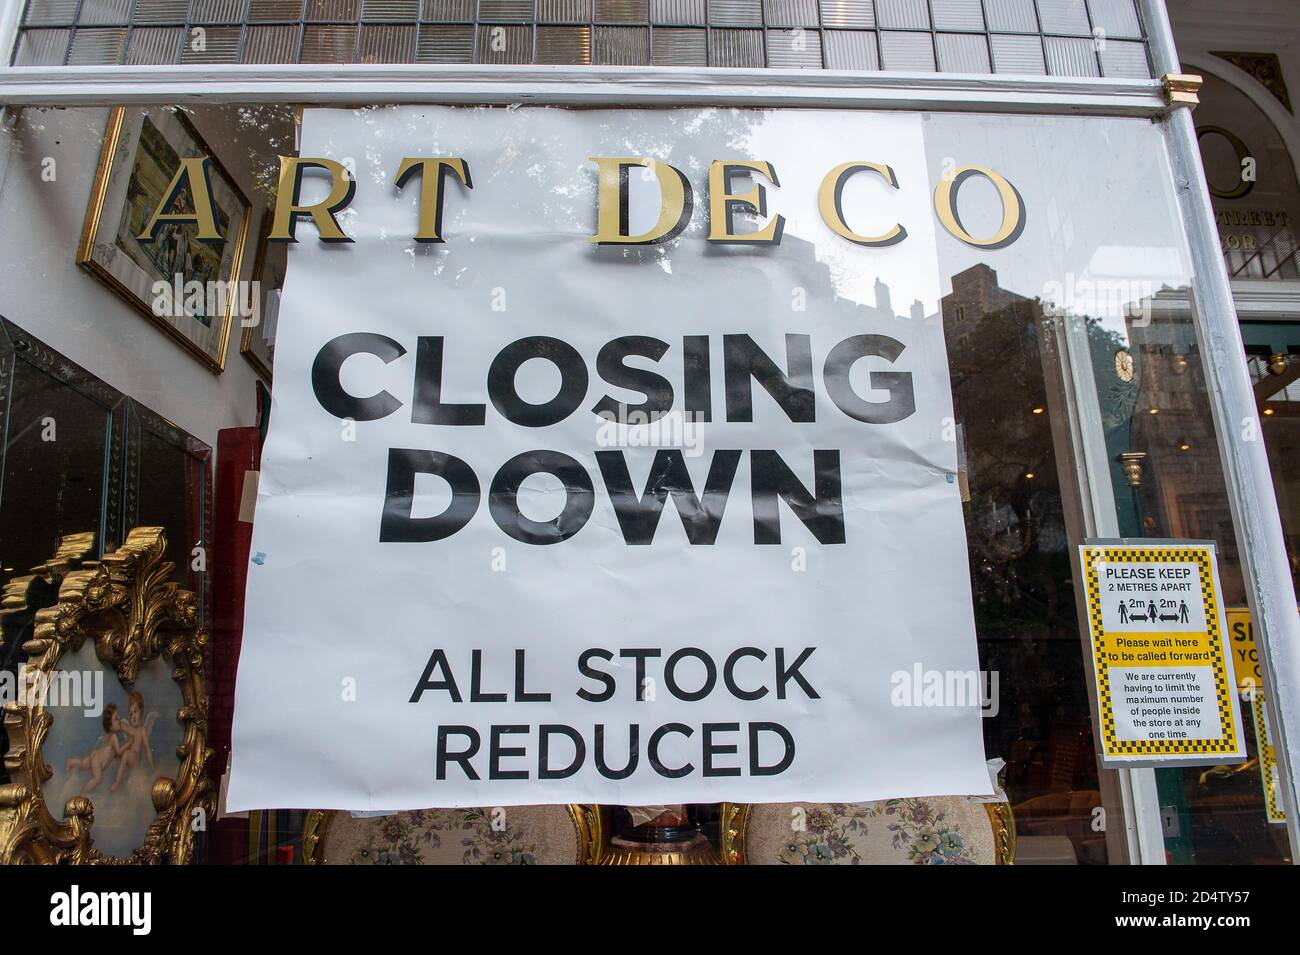 Windsor, Berkshire, UK. 11th October, 2020. A closing down sign at an Art Deco antiques shop. Twenty new cases of Covid-19 have been reported in the past 24 hours in the Royal Borough of Windsor and Maidenhead. Shops and restaurants have more notices in their windows about the measures they are taking to help stop the spread of Covid-19. The Government are expected to announce a new three tier system lockdown system for England following a second spike in positive cases. Credit: Maureen McLean/Alamy Stock Photo